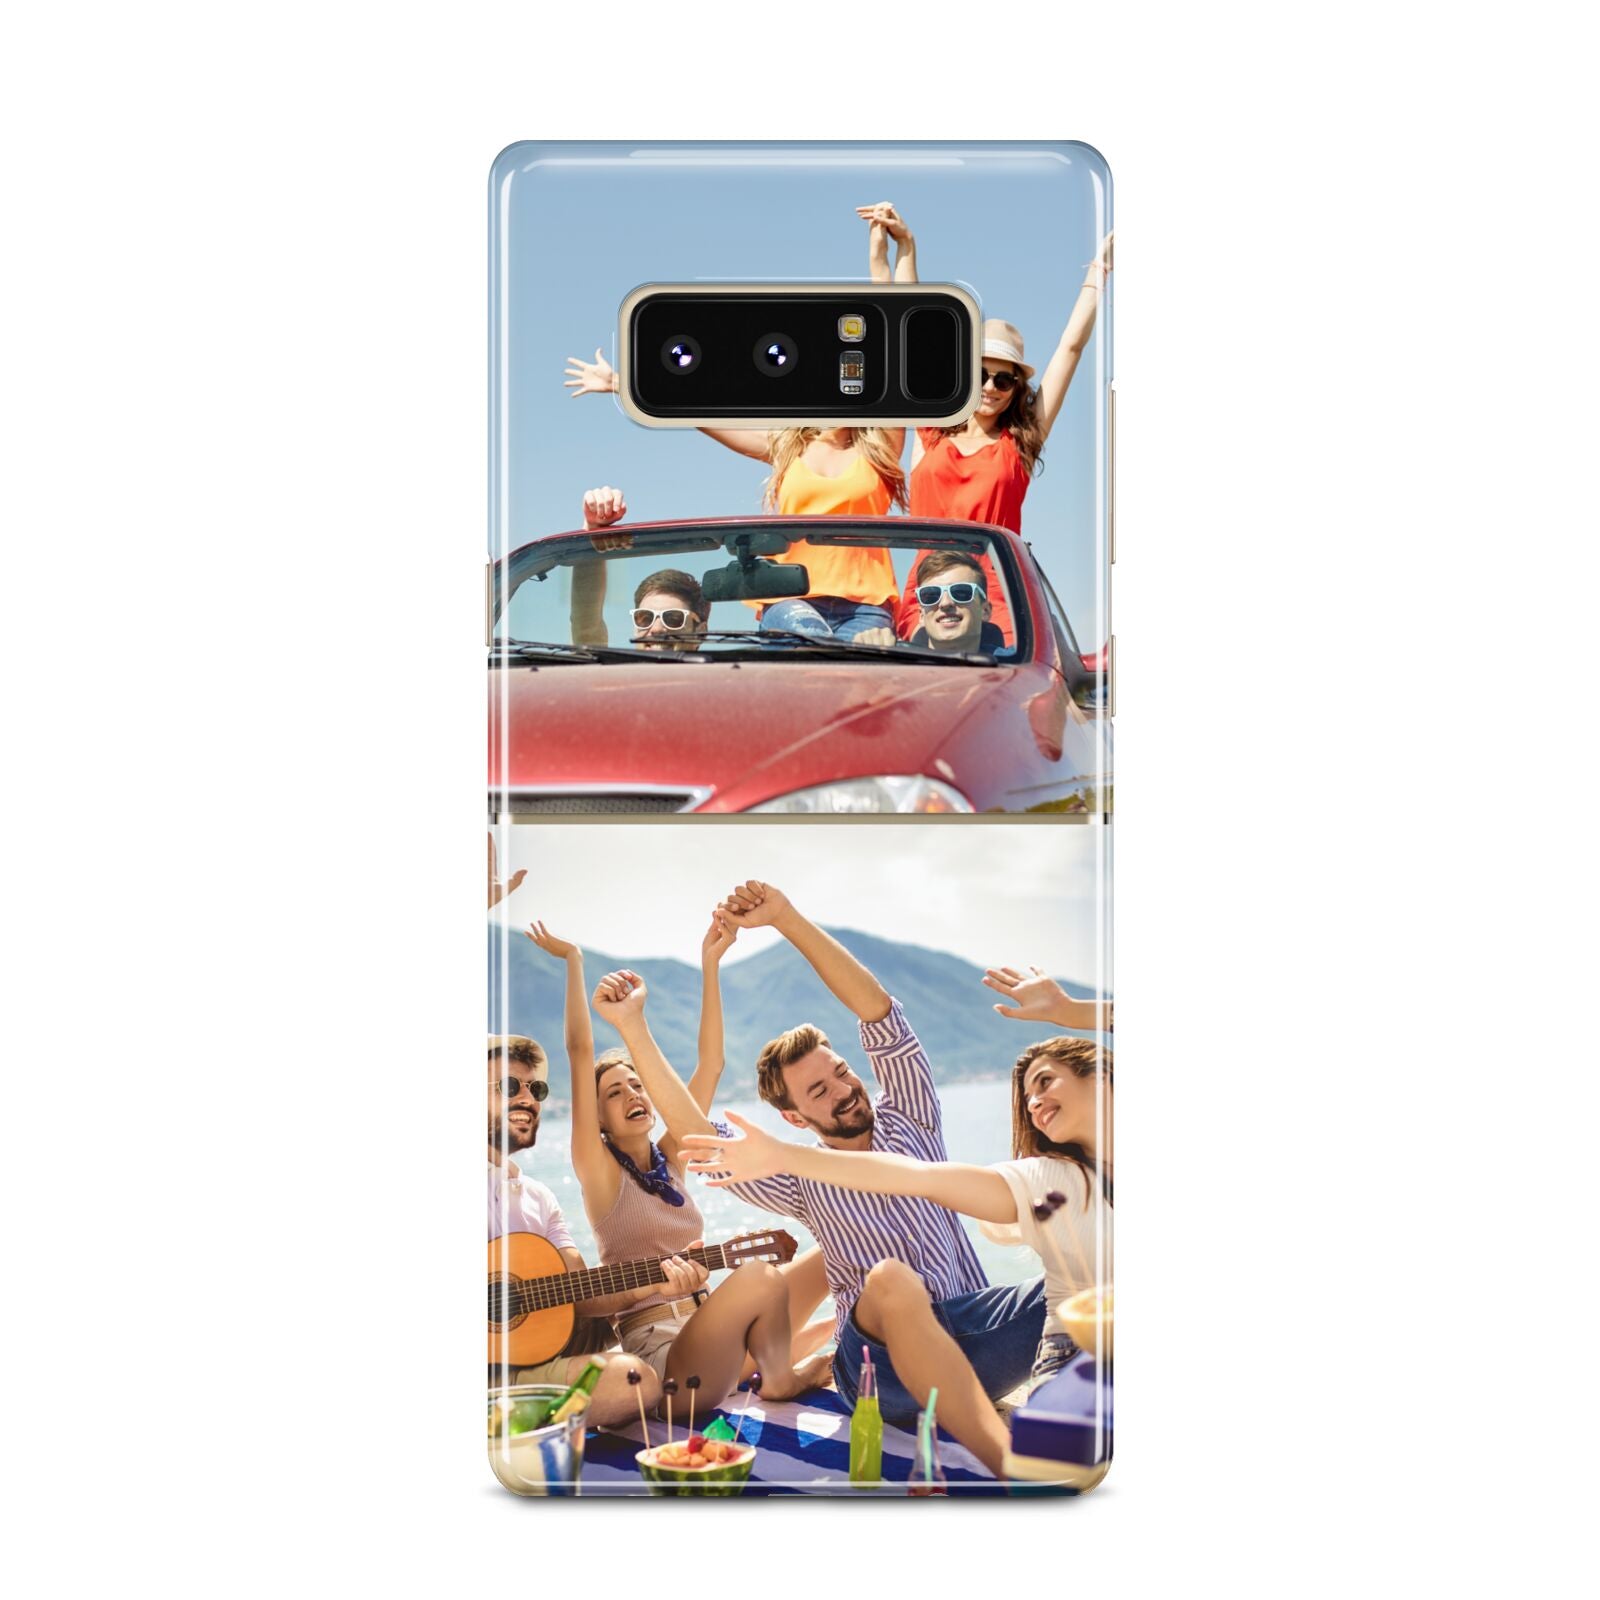 Two Photo Samsung Galaxy Note 8 Case